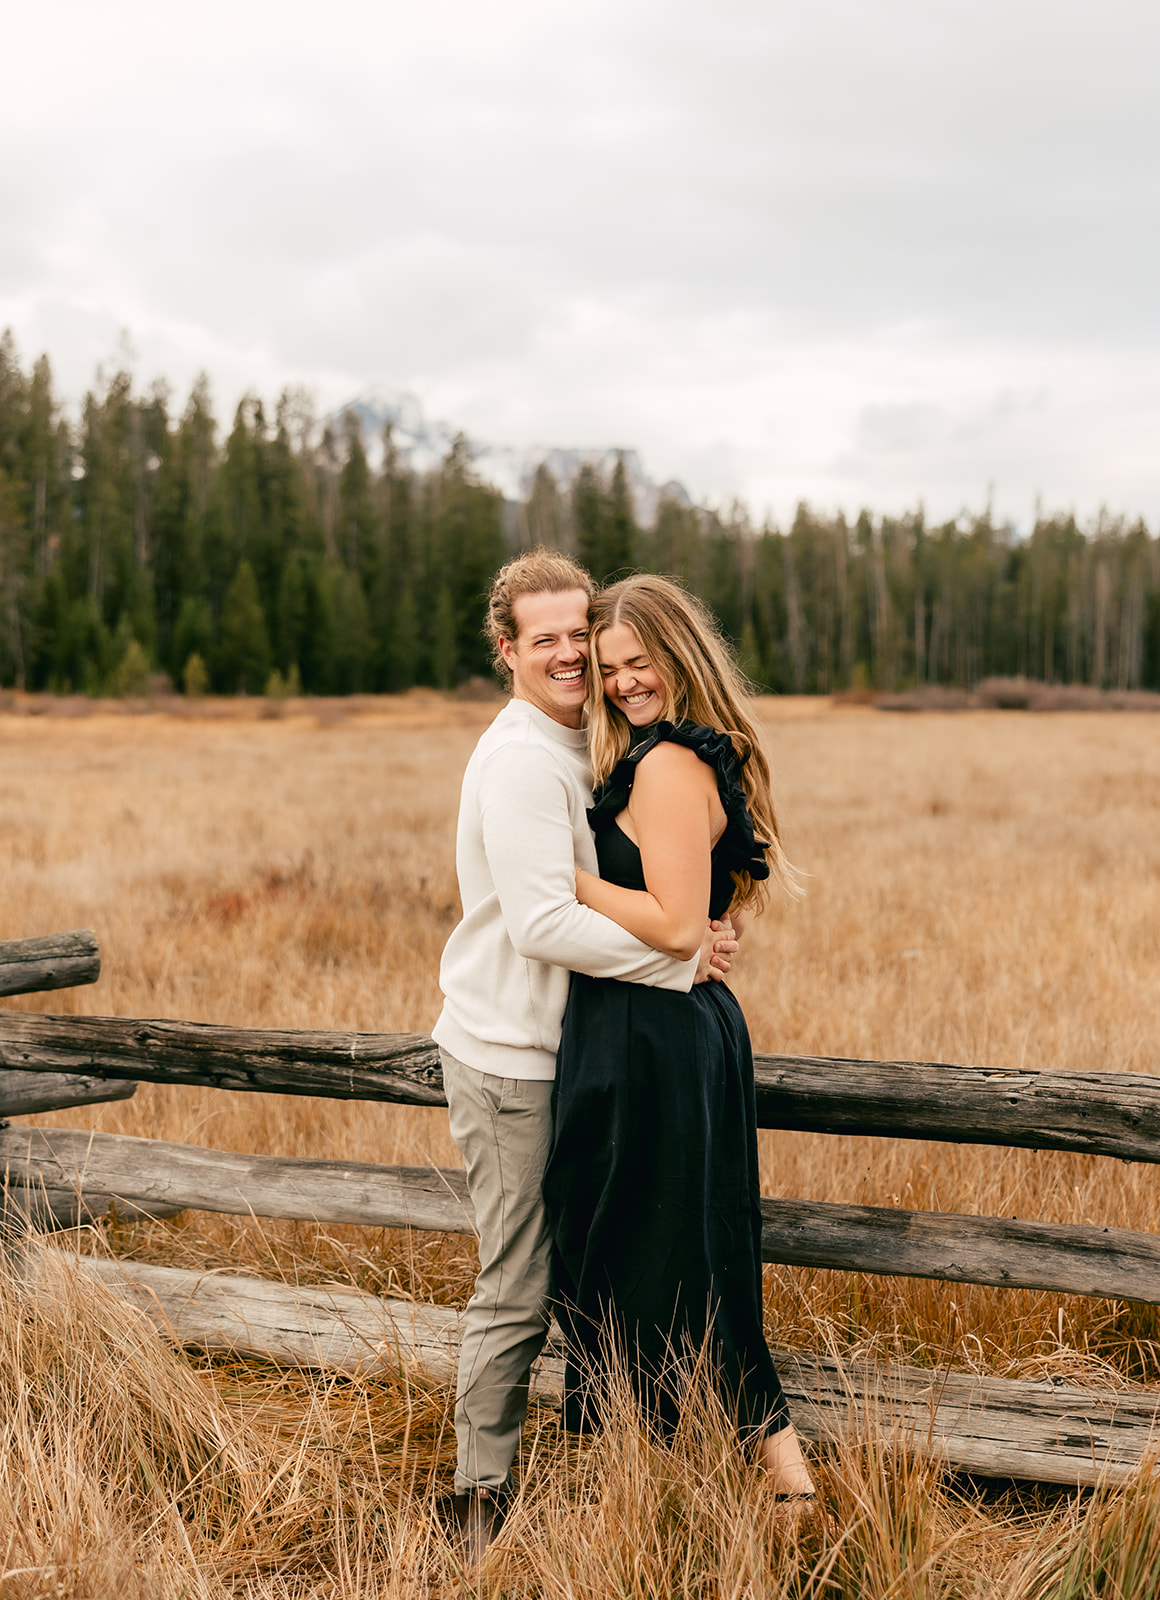 Engagements in the Sawtooth Mountains of Idaho.